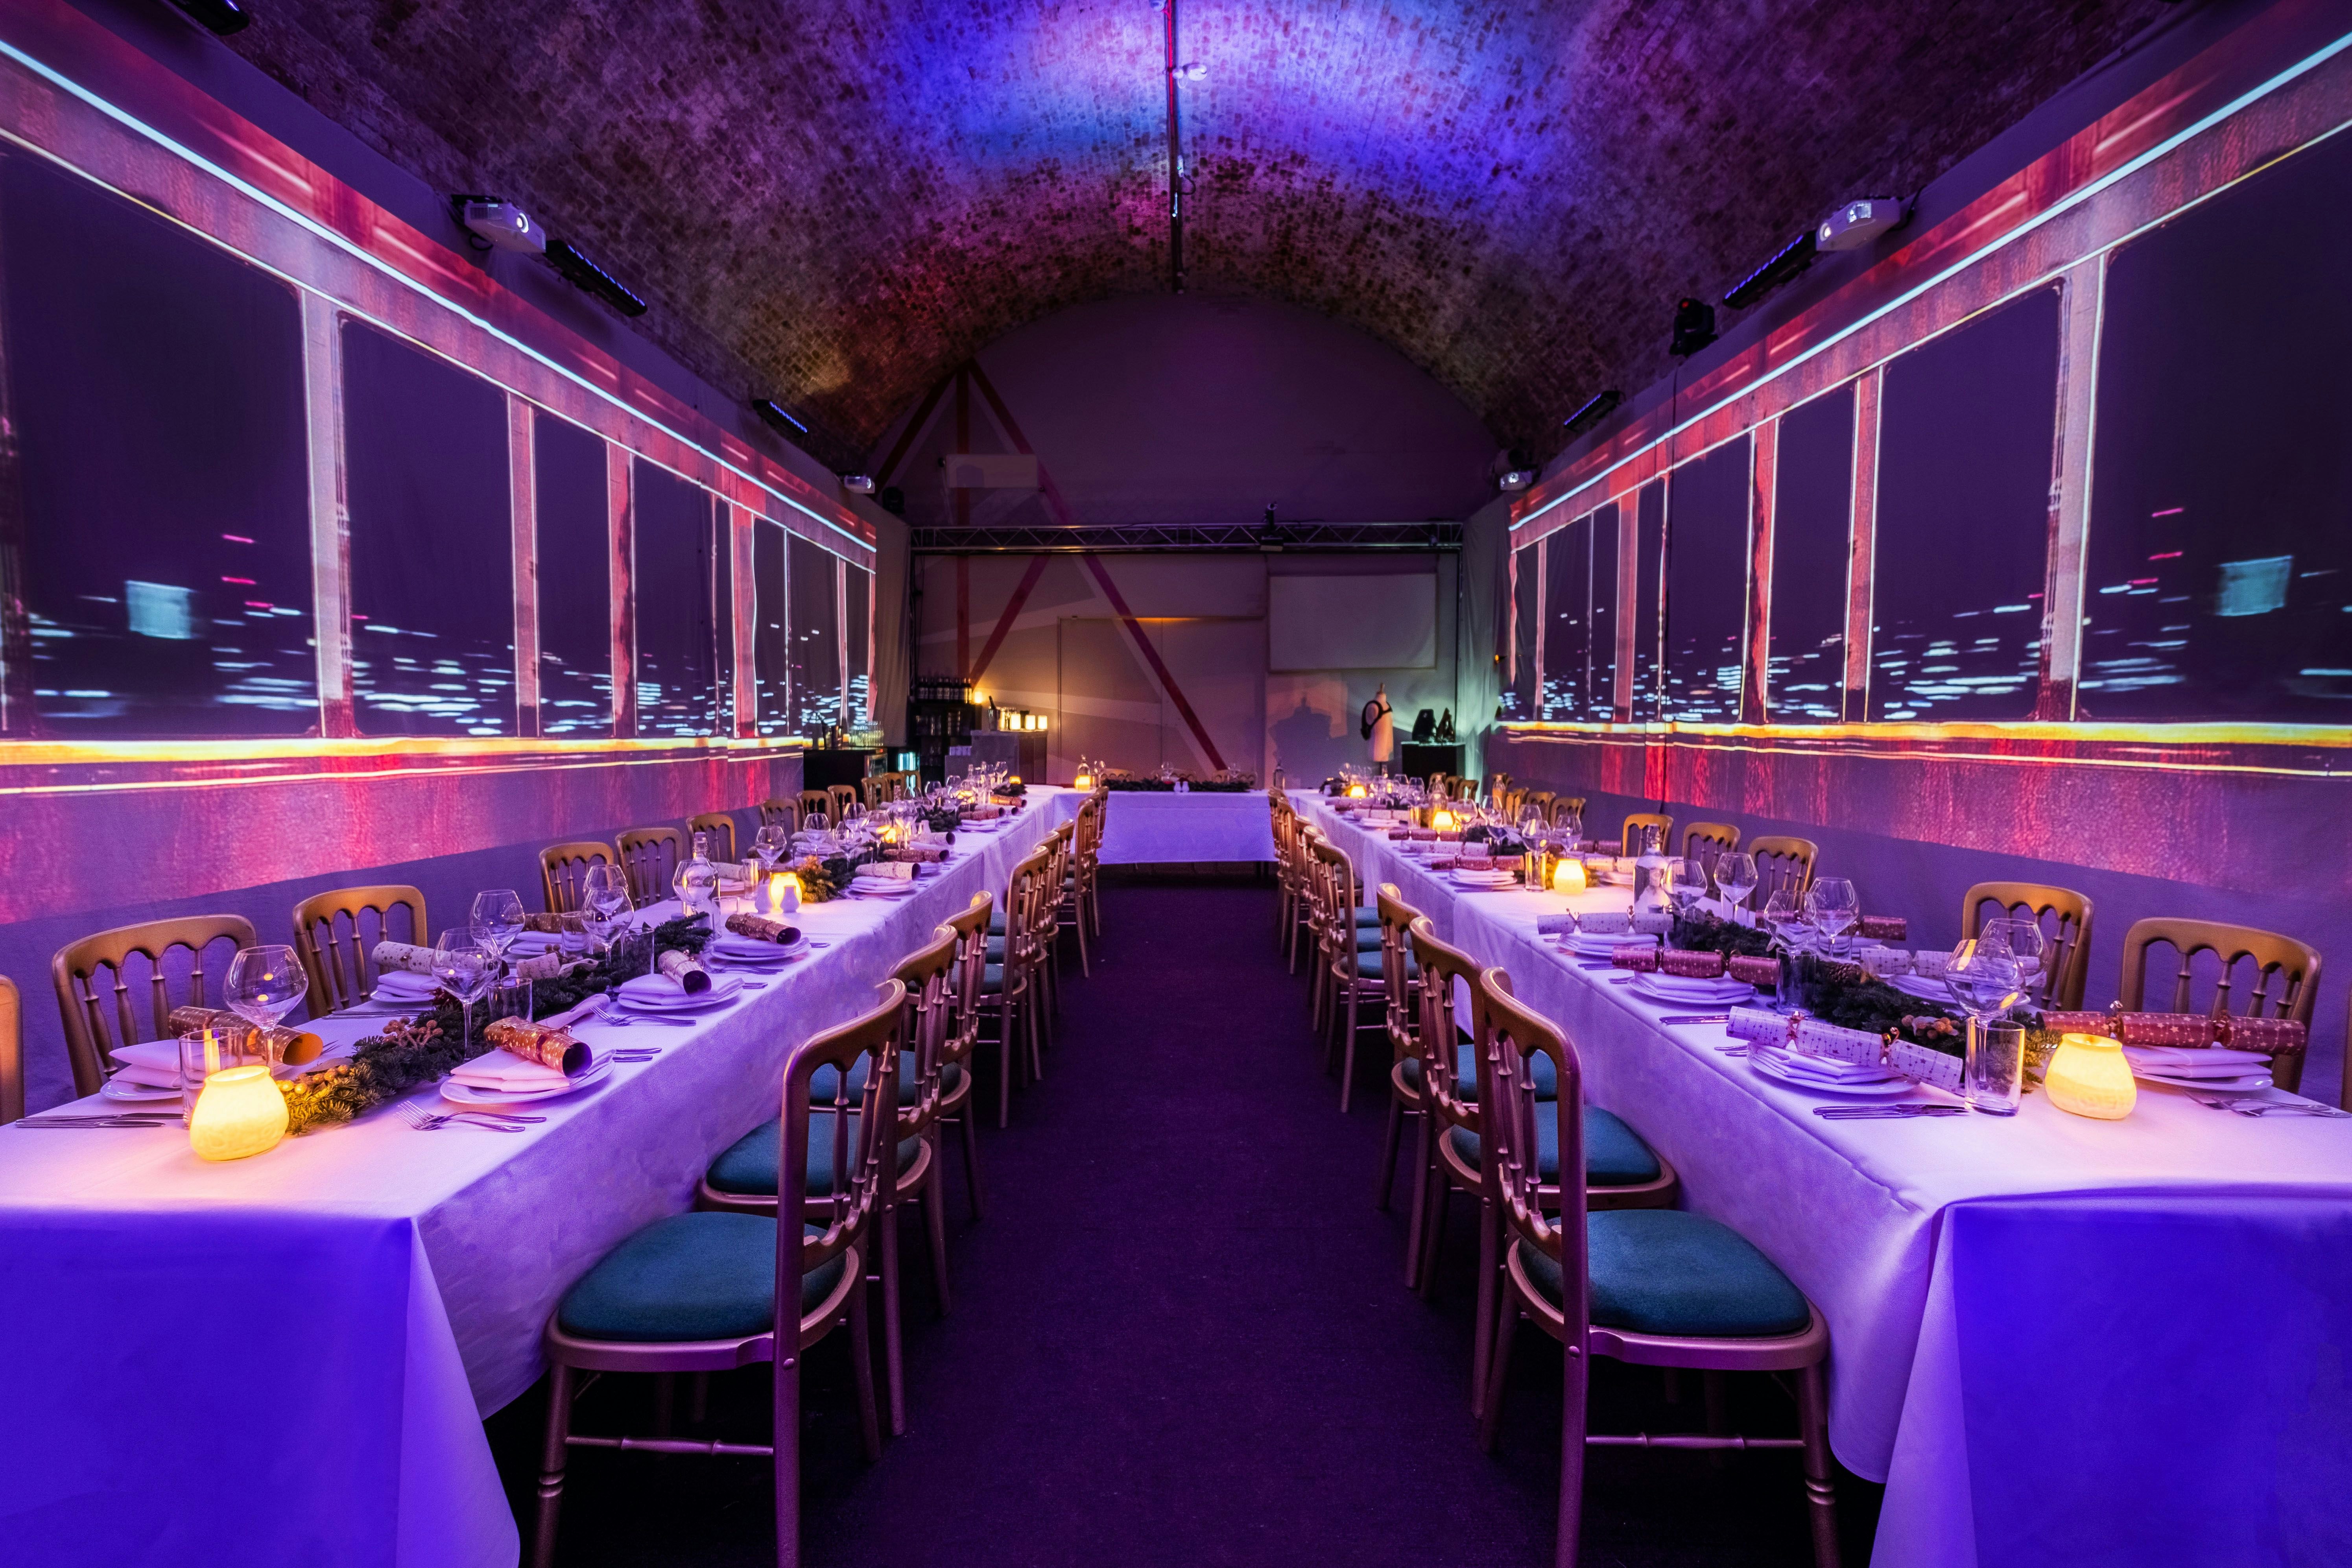 Aures London  - Brand, Corporate & Private Parties image 9